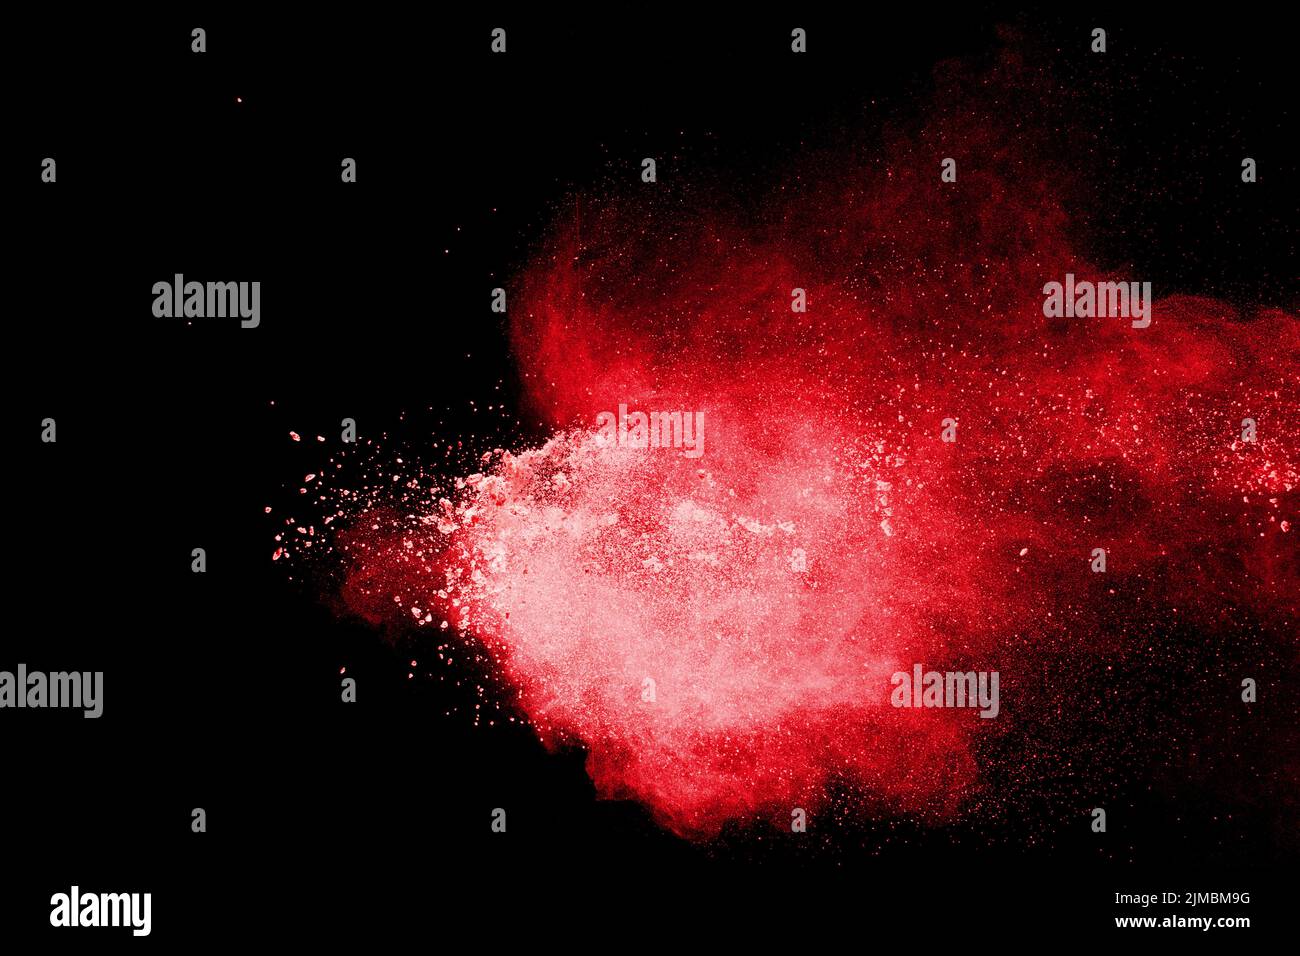 Red color powder explosion on black background.Freeze motion of red dust particles splashing. Stock Photo